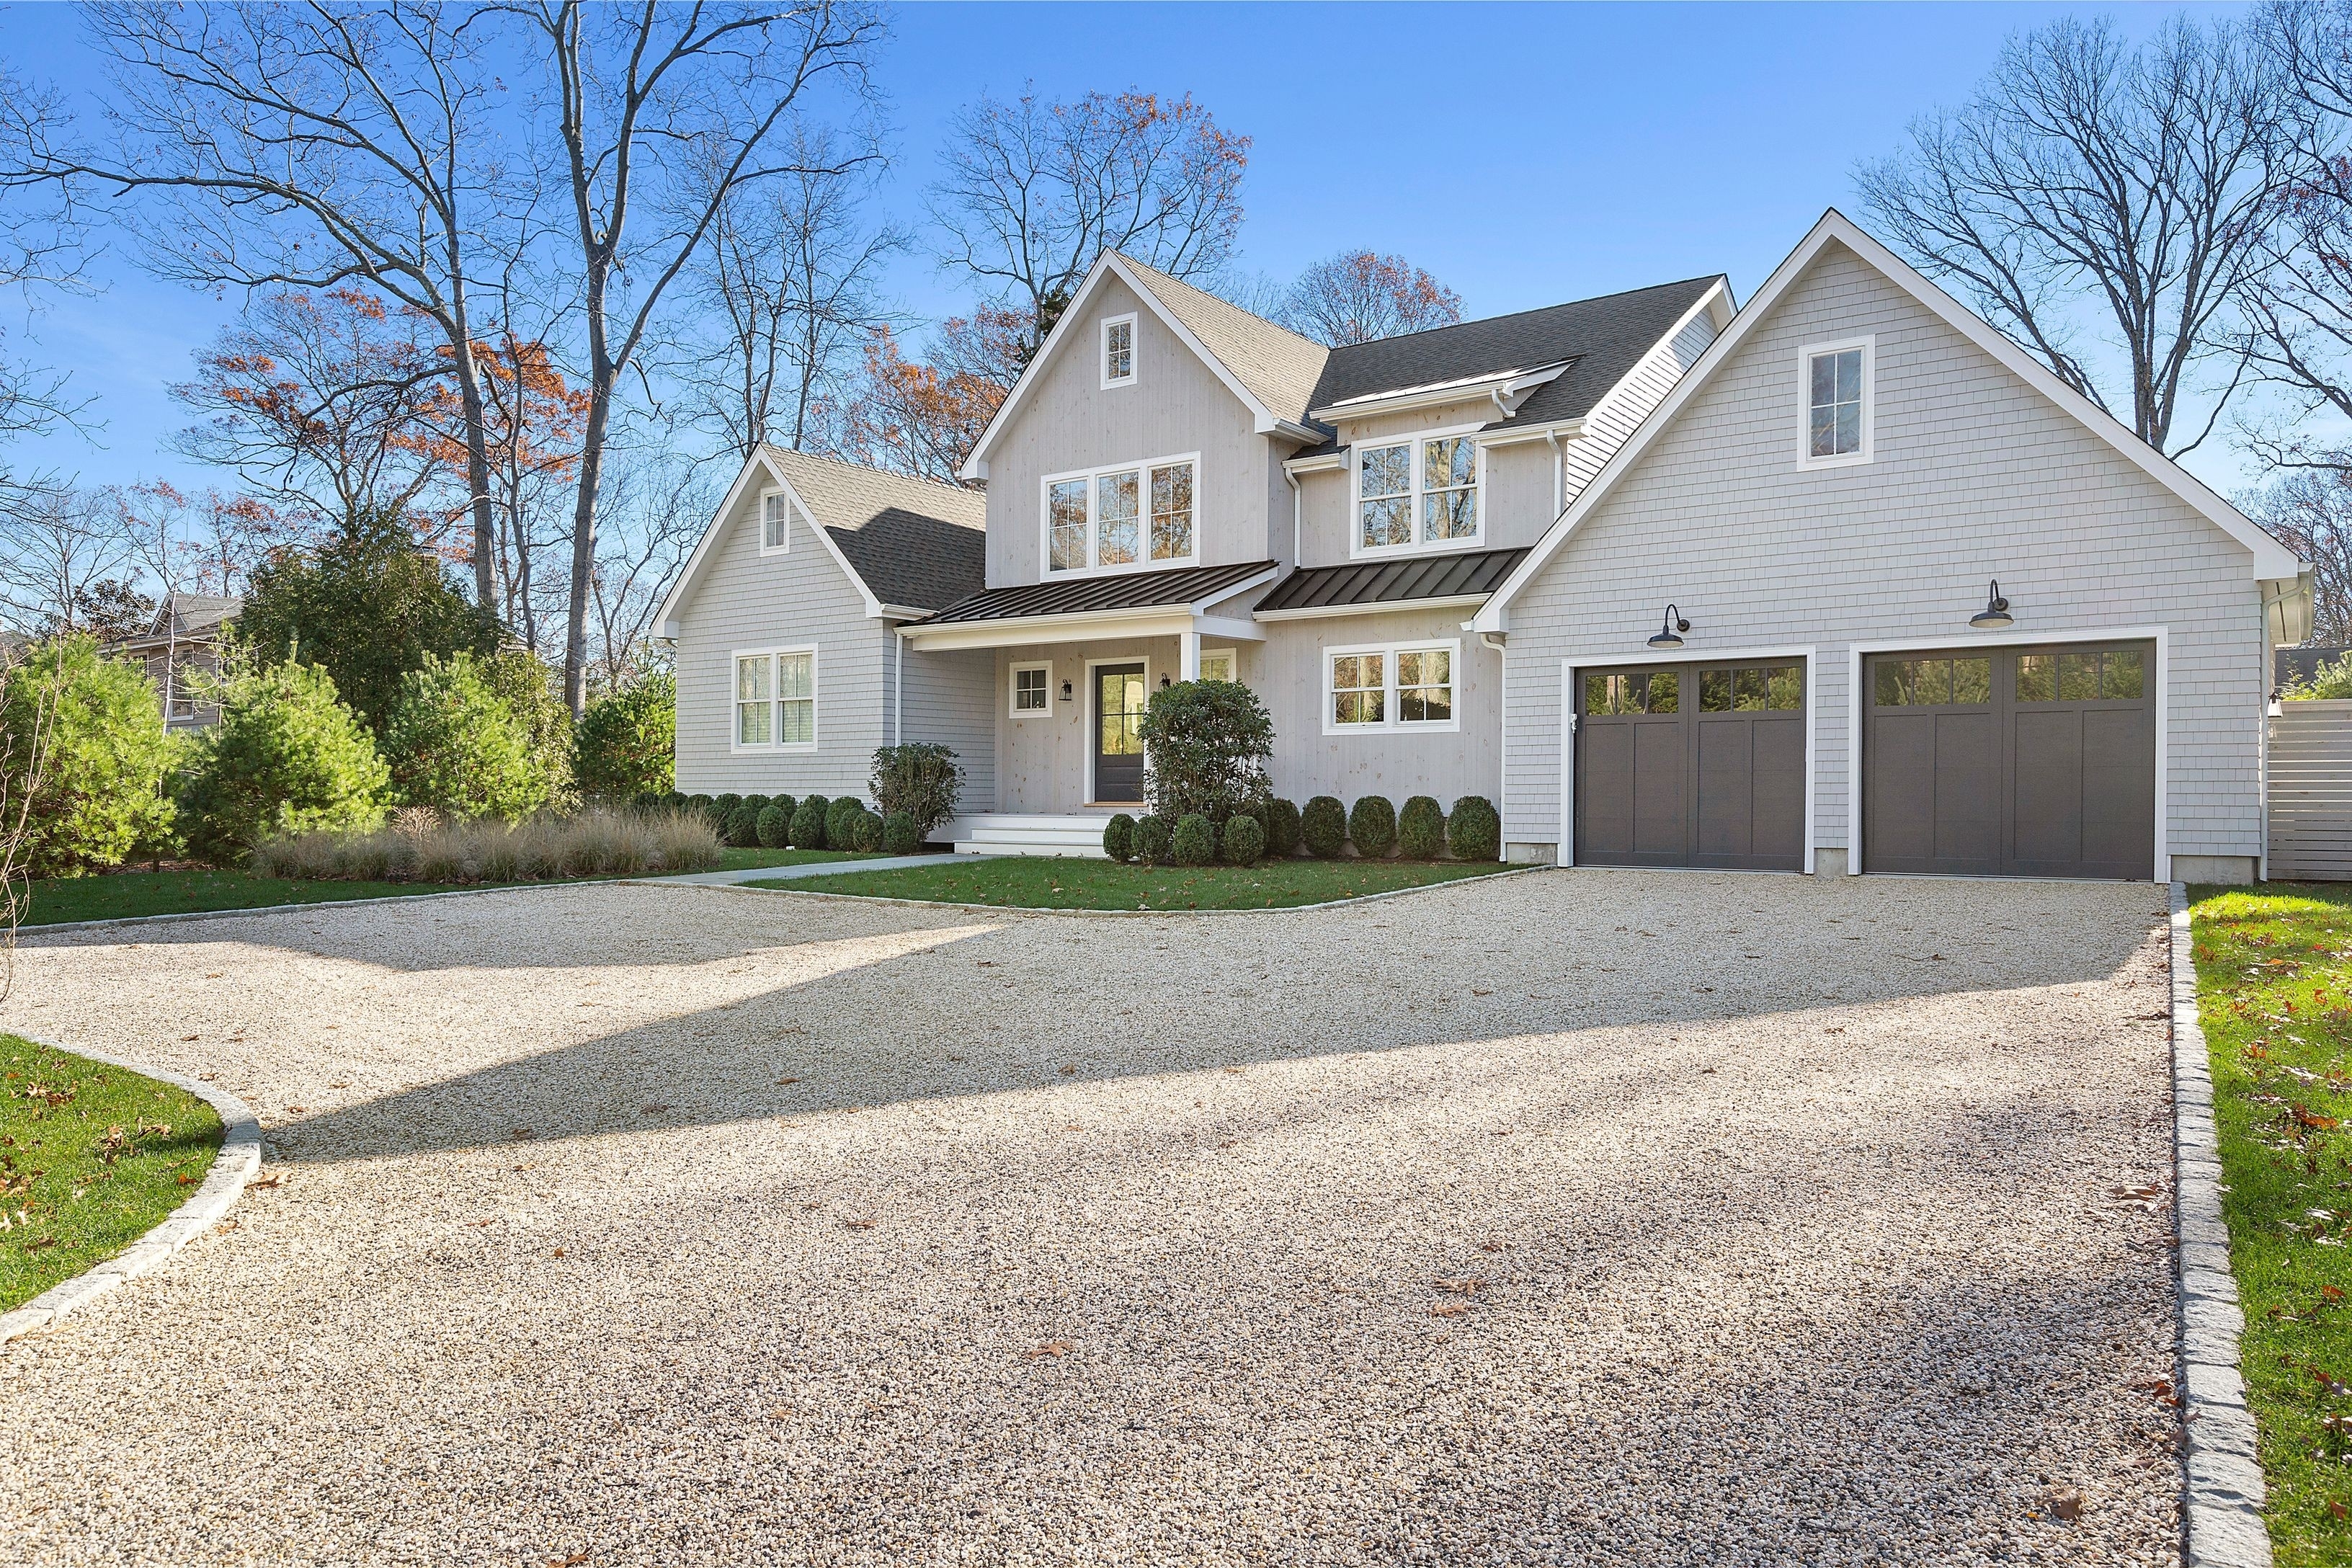 2. Single Family Homes for Sale at Northwest Woods, East Hampton, NY 11937